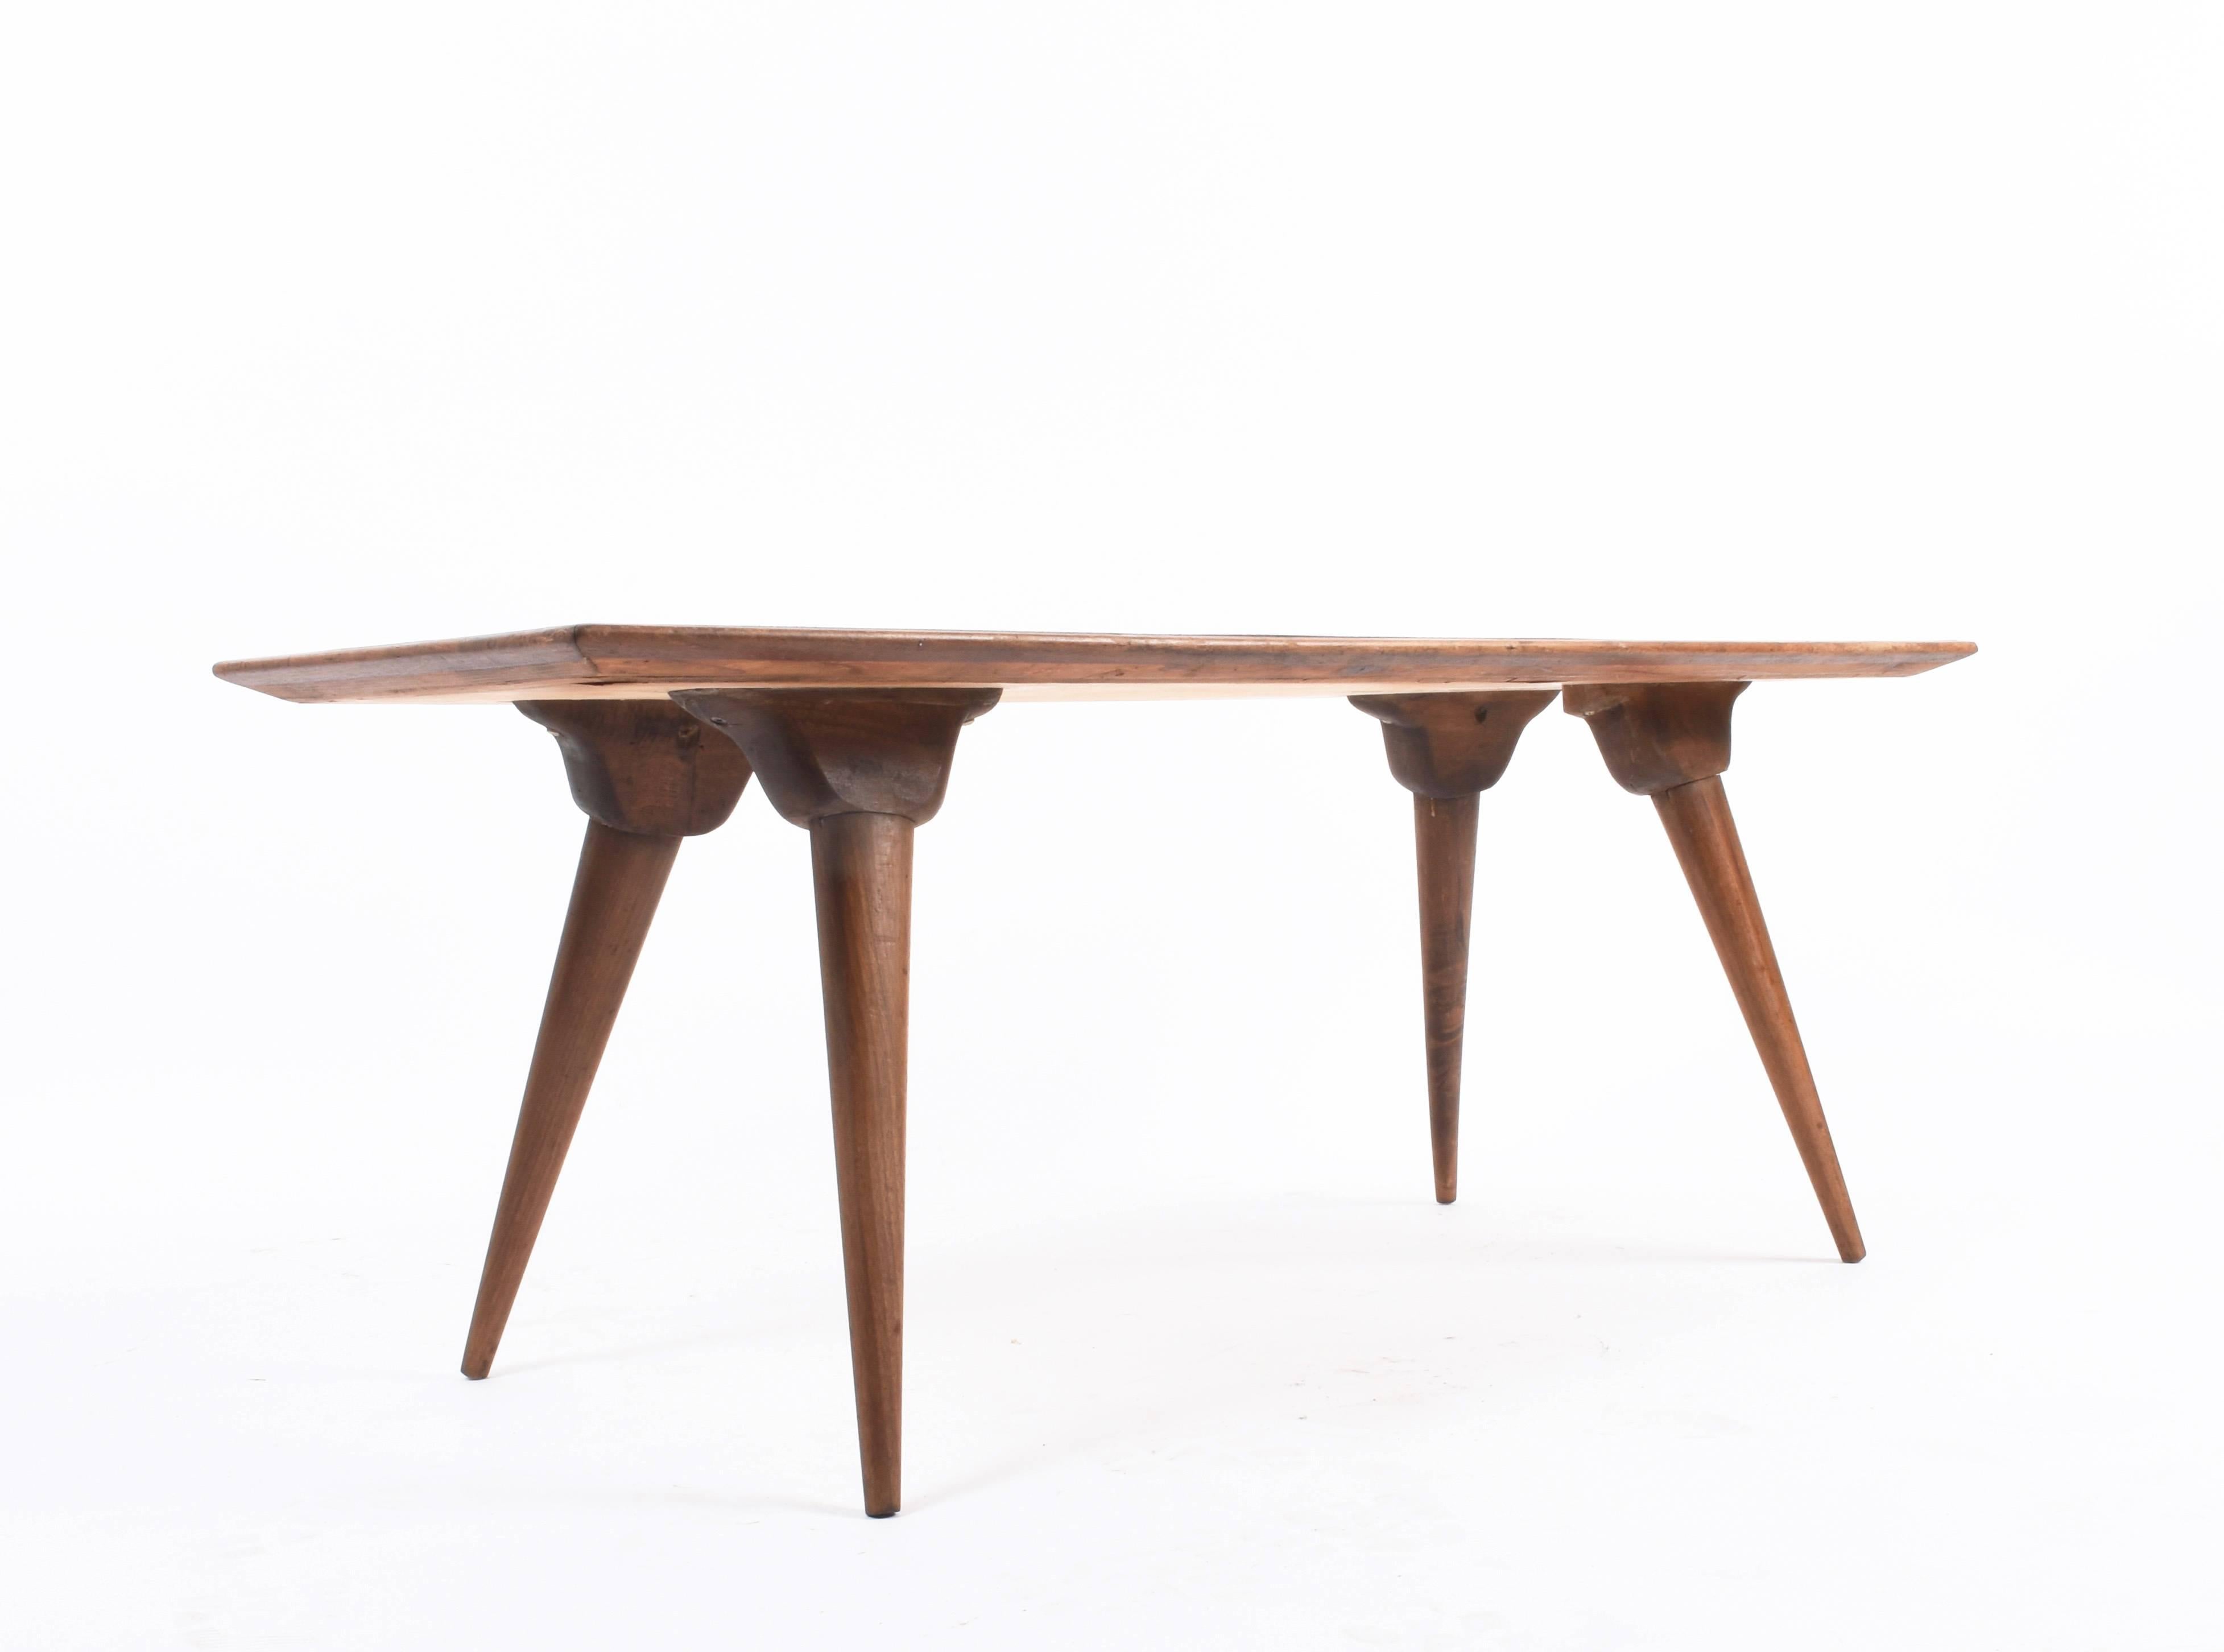 Midcentury Printed Wood and Plastic Italian Coffee Table after De Poli, 1950s For Sale 6